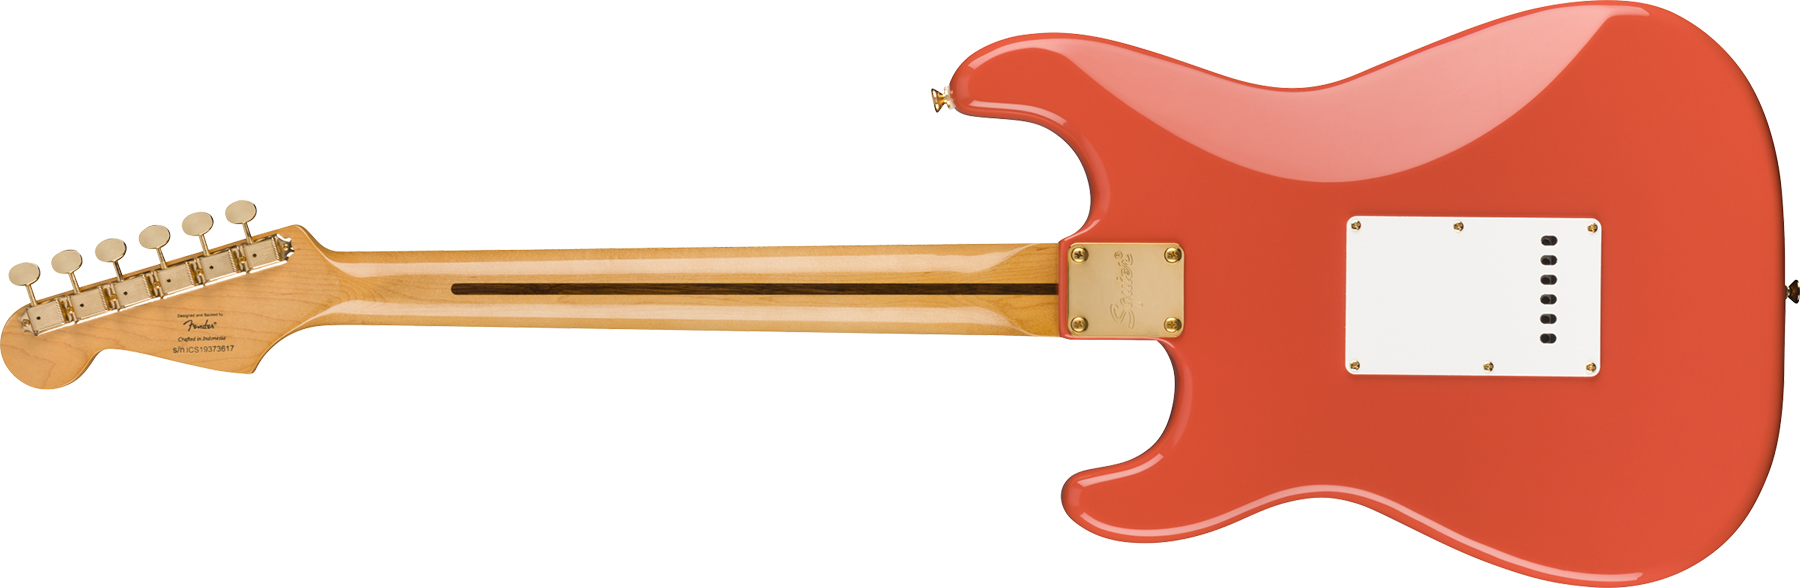 Squier Strat Classic Vibe '50s Fsr Ltd Mn - Fiesta Red With Gold Hardware - Str shape electric guitar - Variation 1